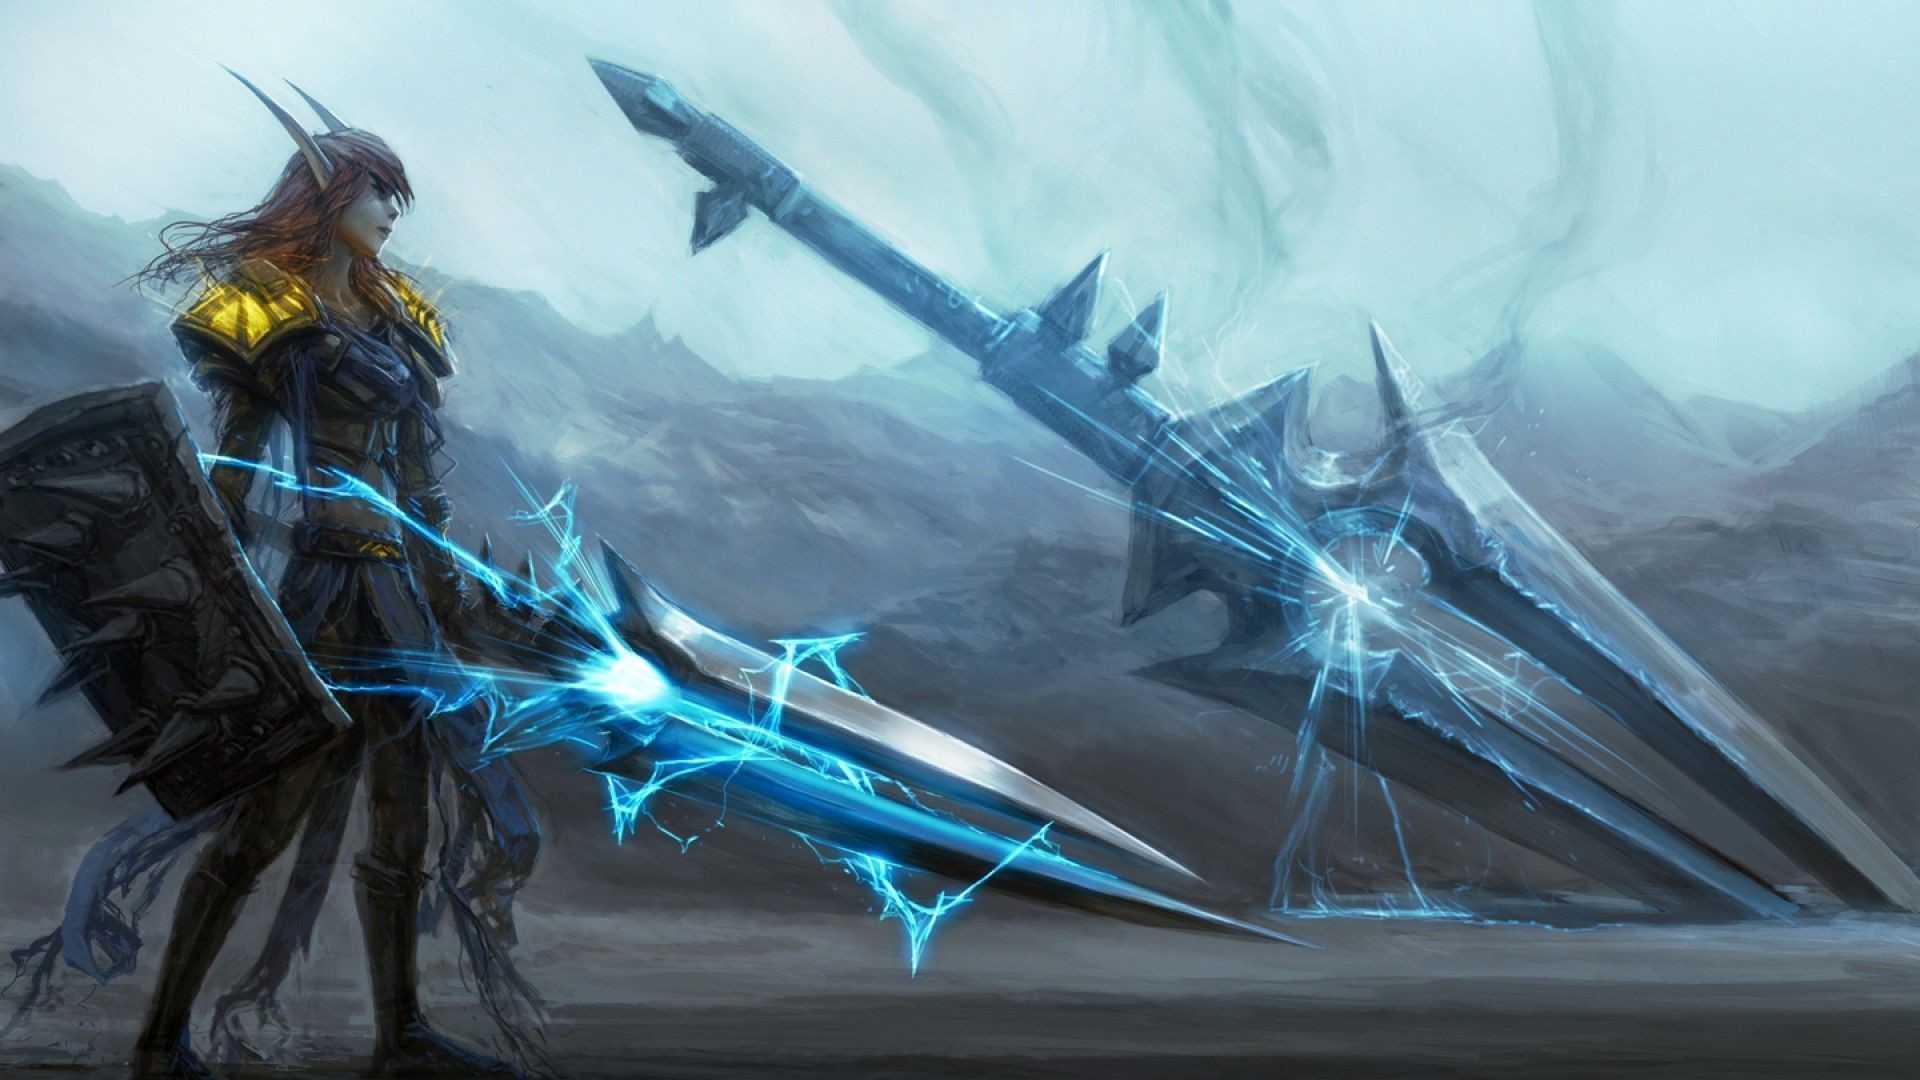 1920x1080 Full HD p World of warcraft Wallpapers HD, Desktop Backgrounds World Of  Warcraft HD Wallpapers Wallpapers)